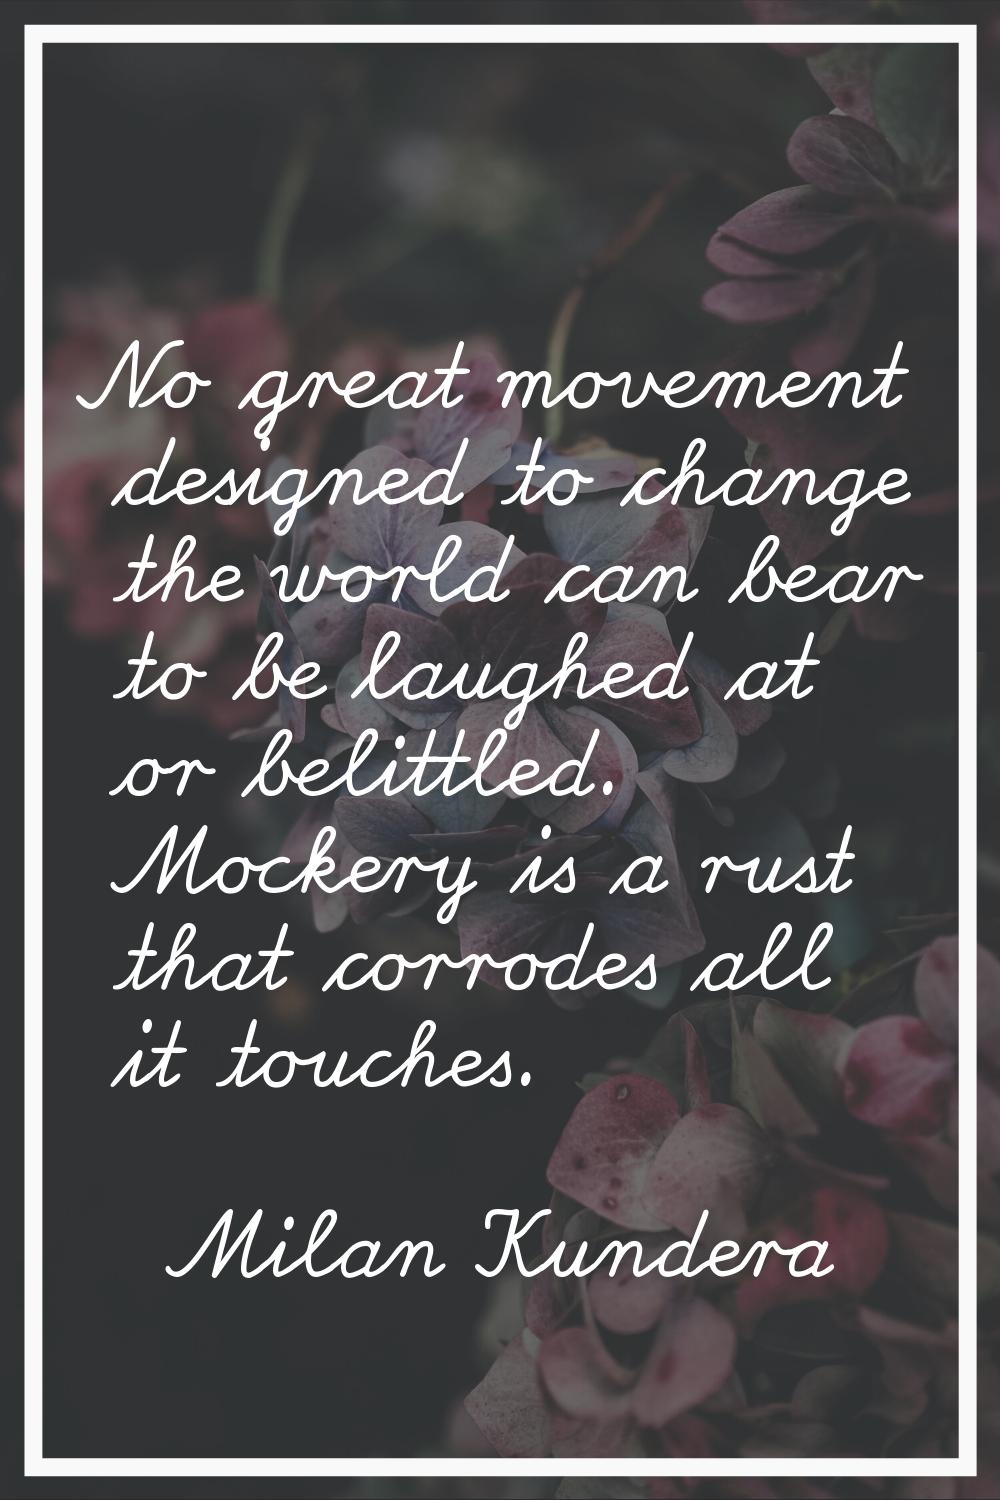 No great movement designed to change the world can bear to be laughed at or belittled. Mockery is a